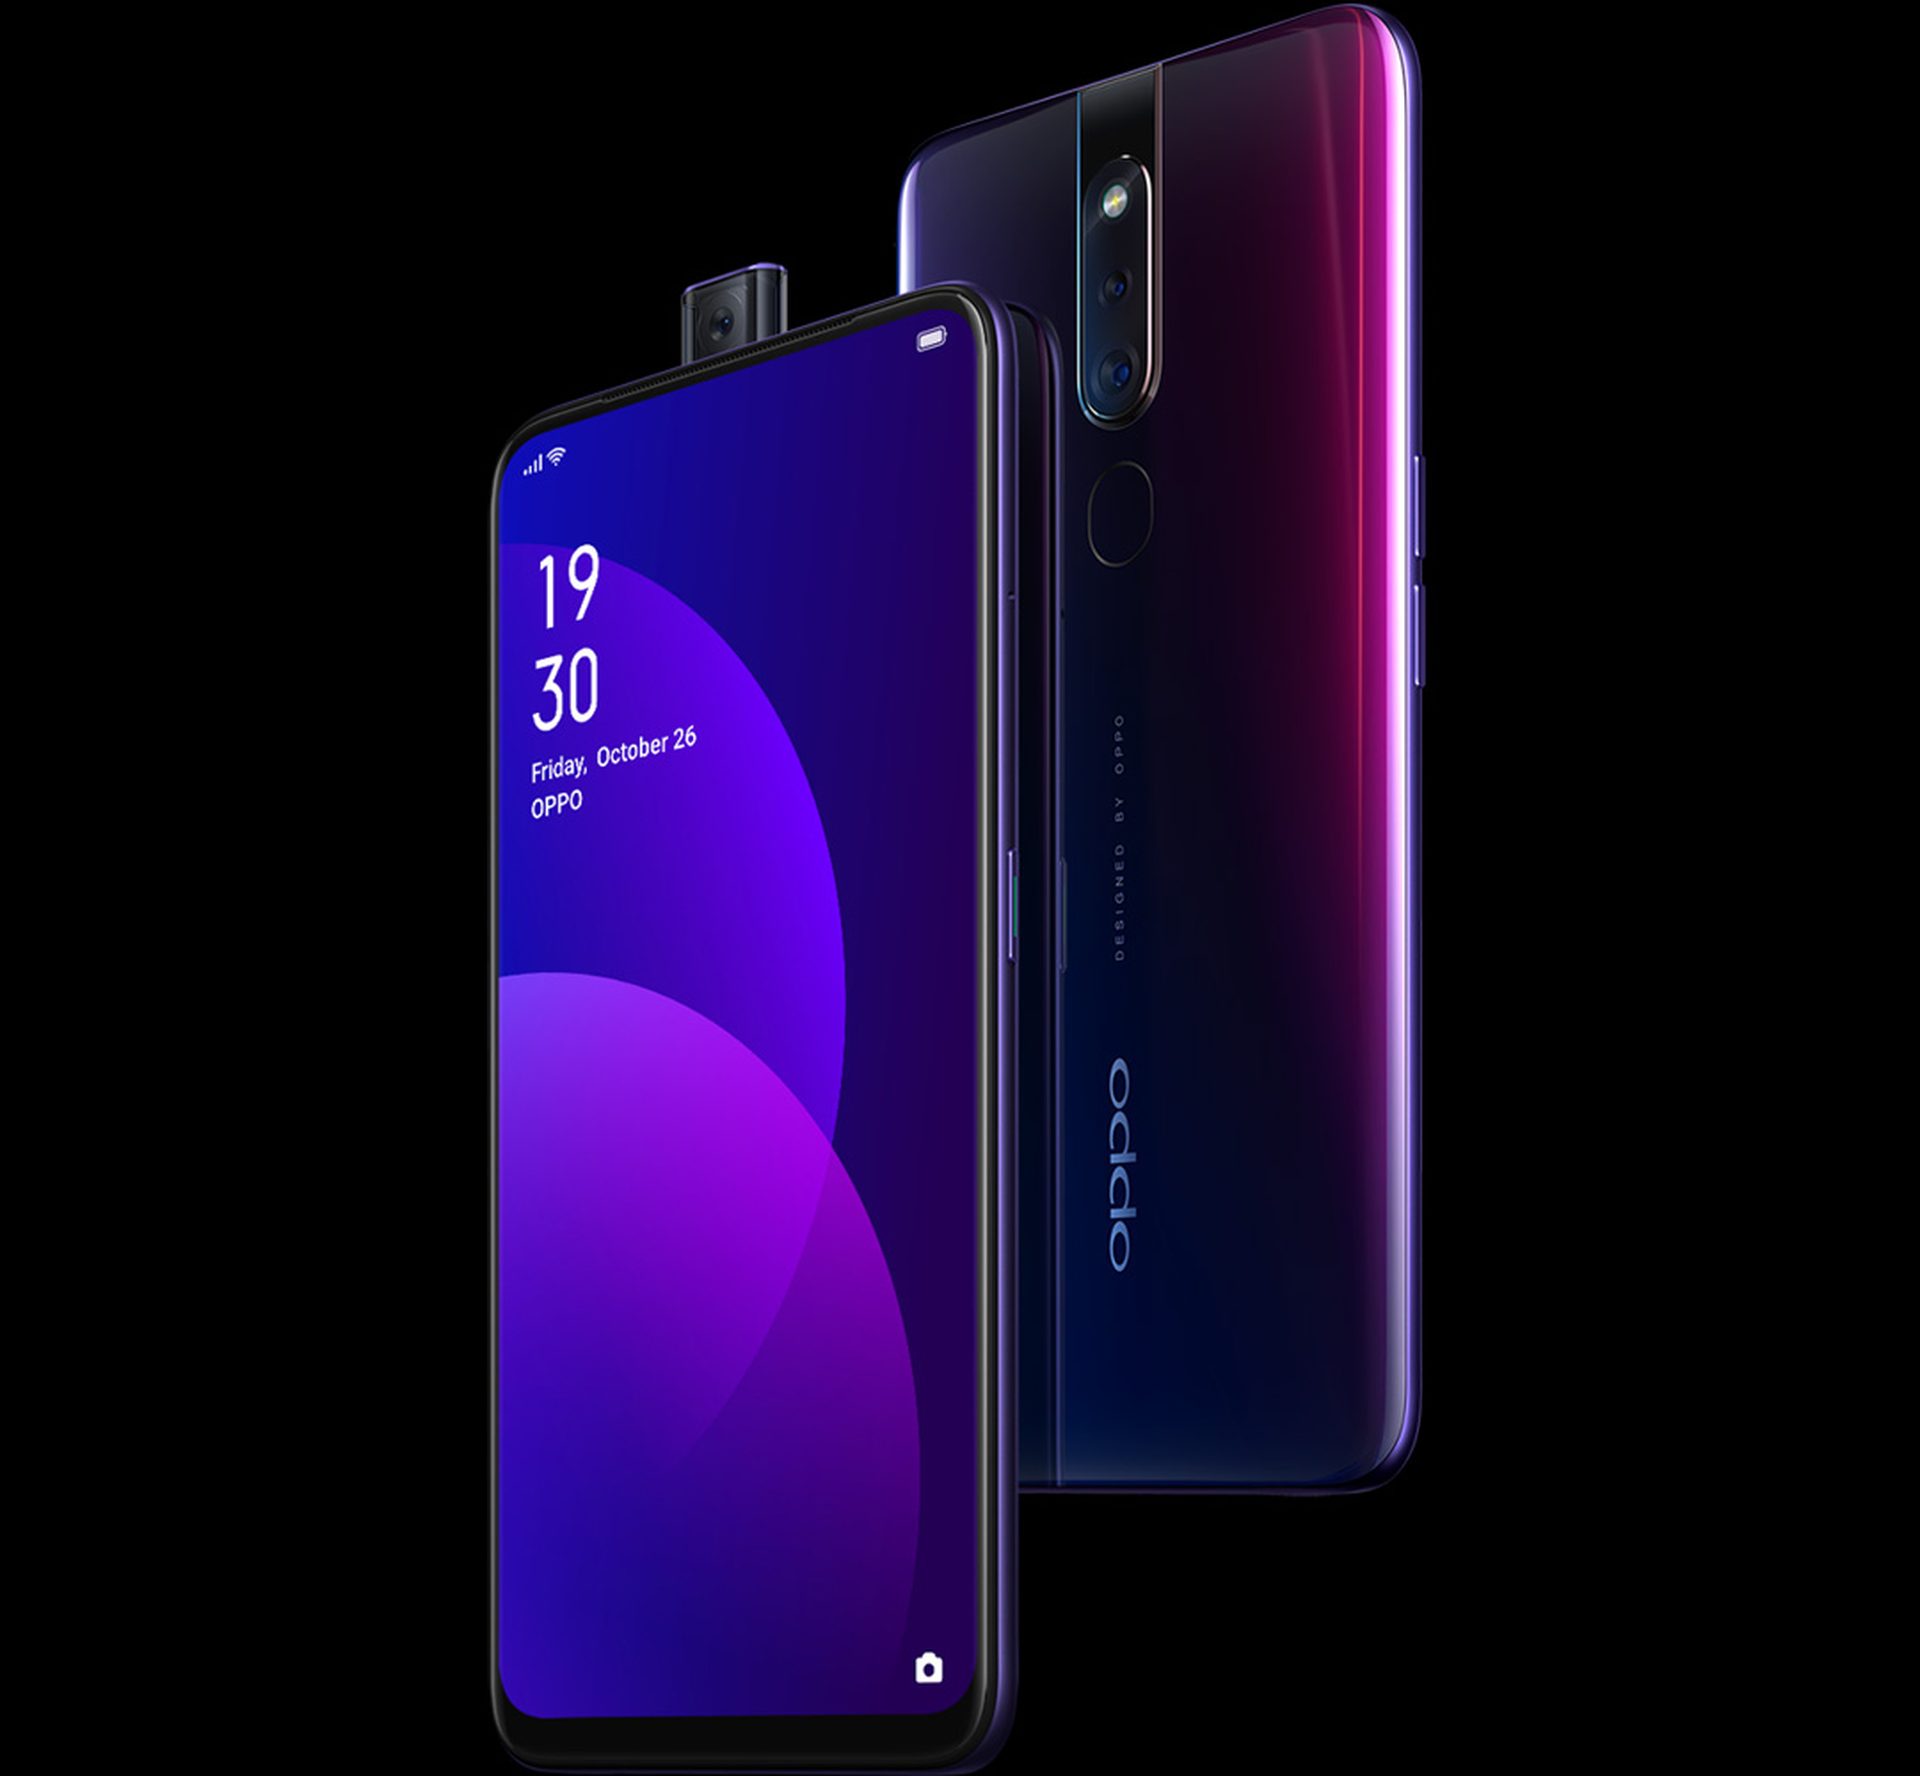 OPPO F11 PRO front camera not working: How to fix the error?